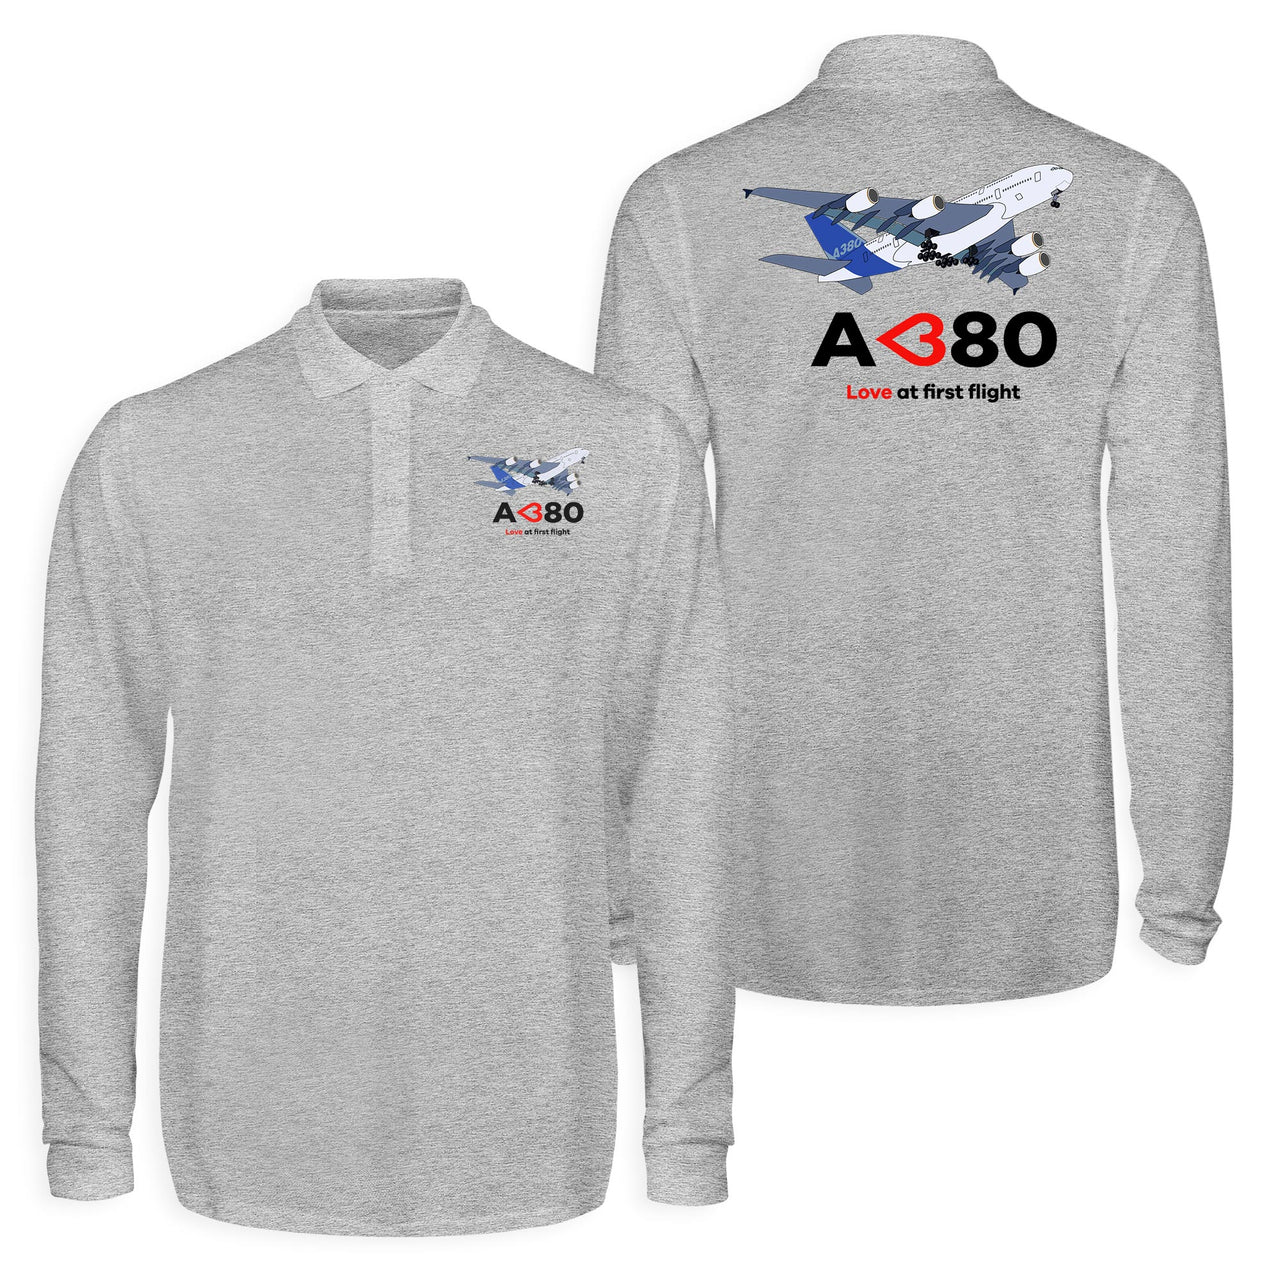 Airbus A380 Love at first flight Designed Long Sleeve Polo T-Shirts (Double-Side)